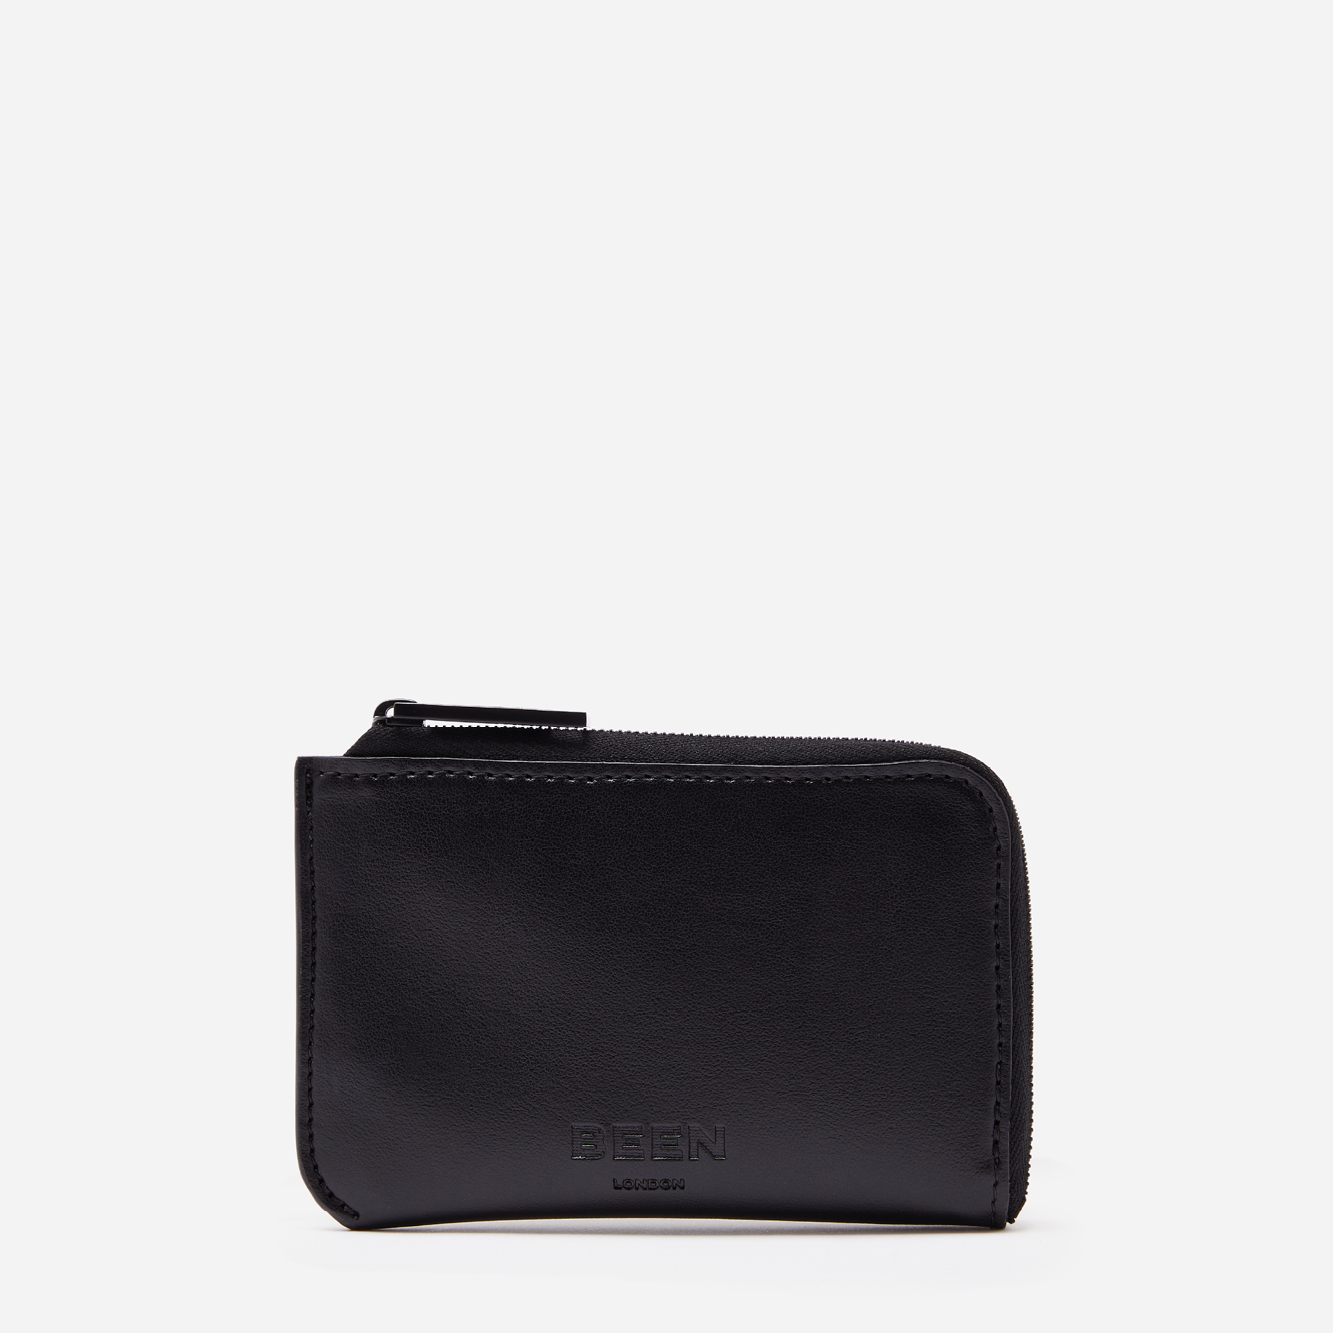 Jude Card Holder in Black Onyx front view